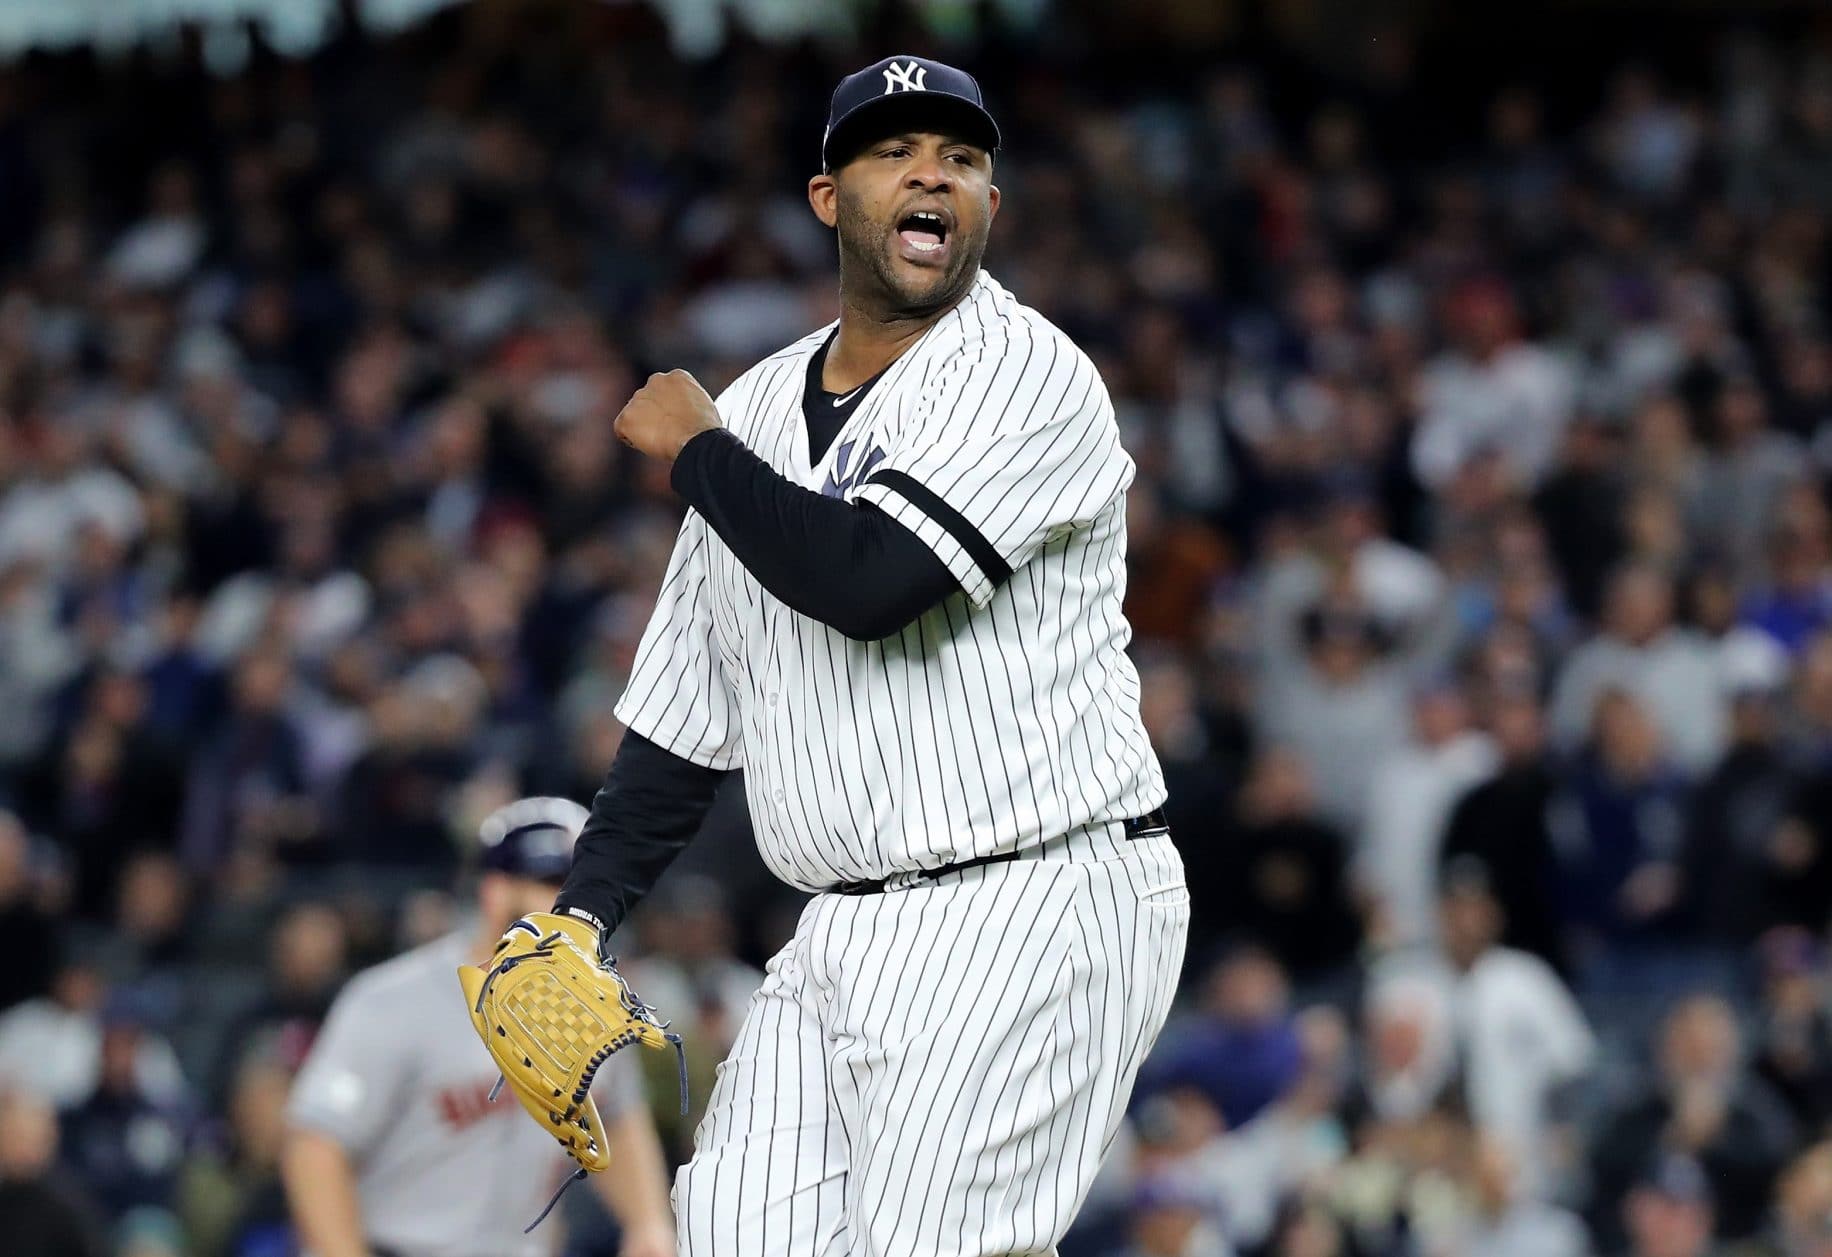 New York Yankees: CC Sabathia's finest moments in pinstripes